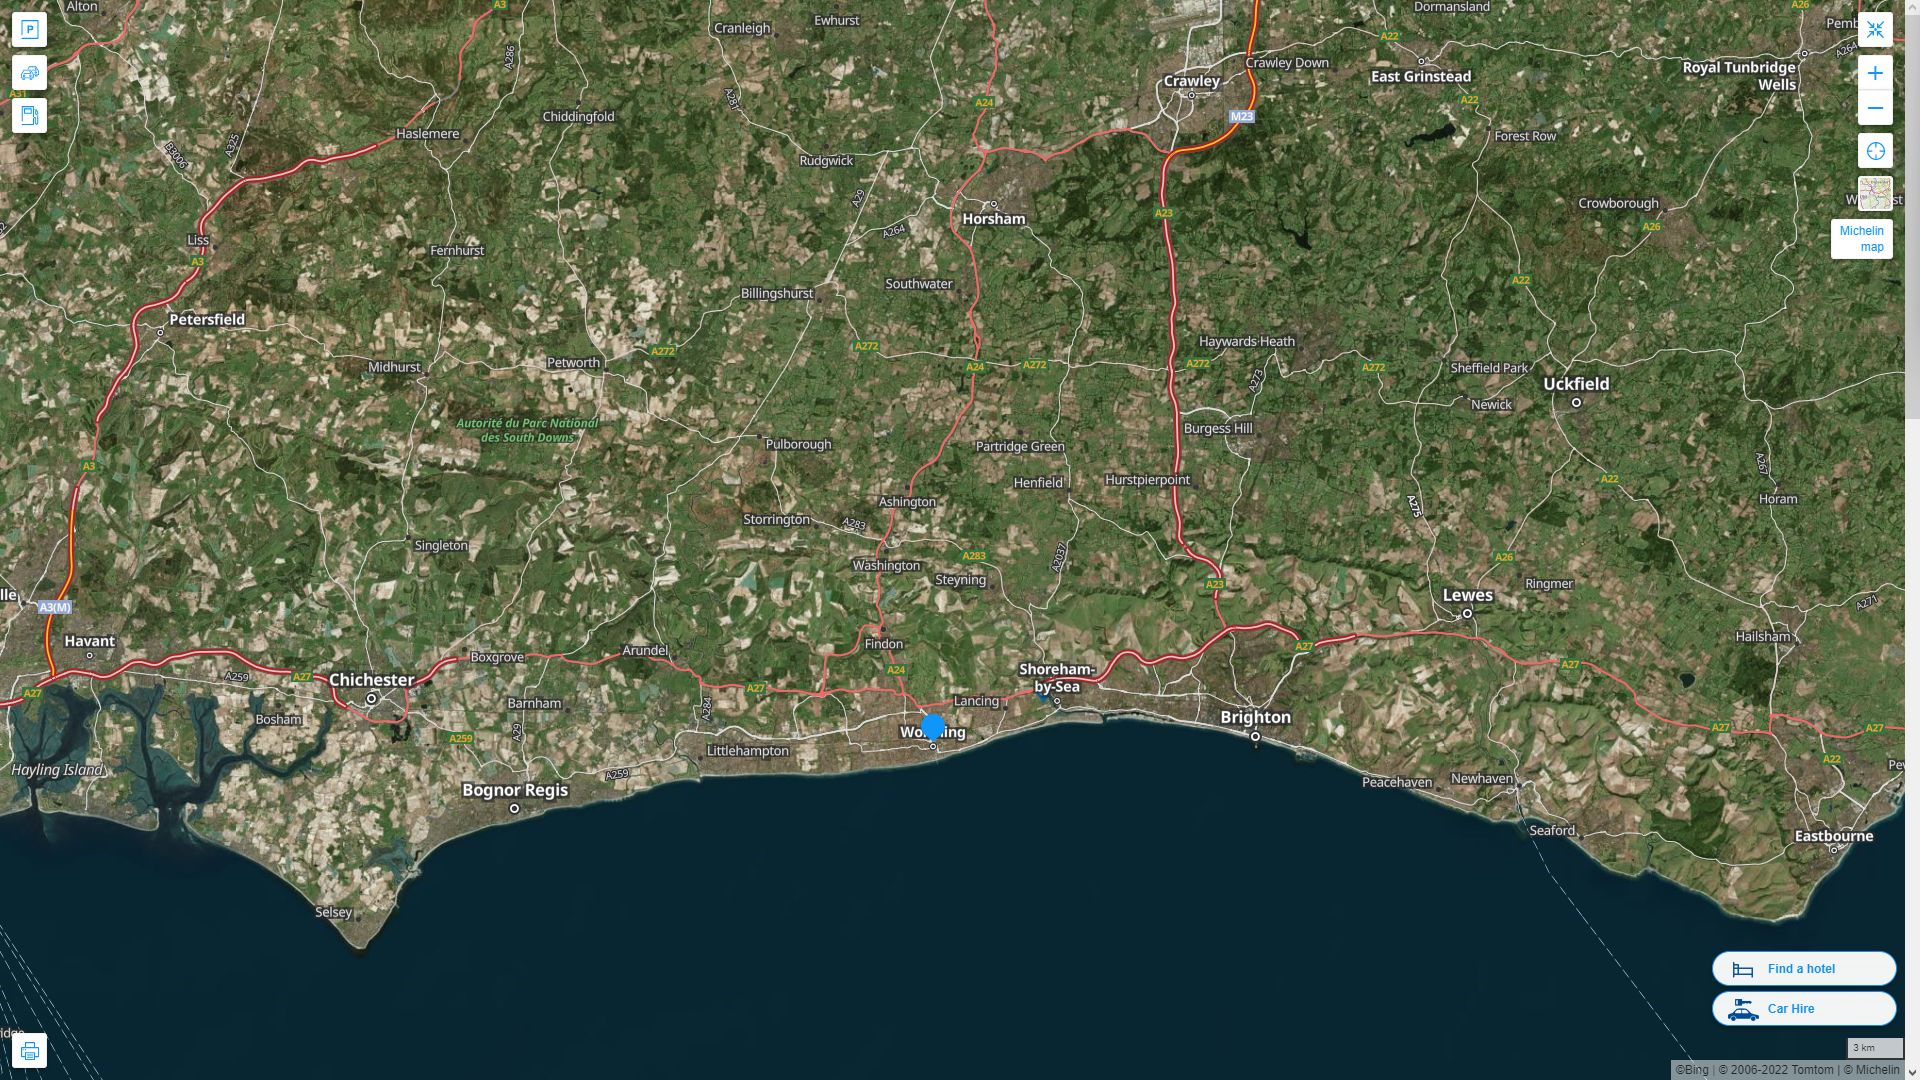 Worthing Highway and Road Map with Satellite View